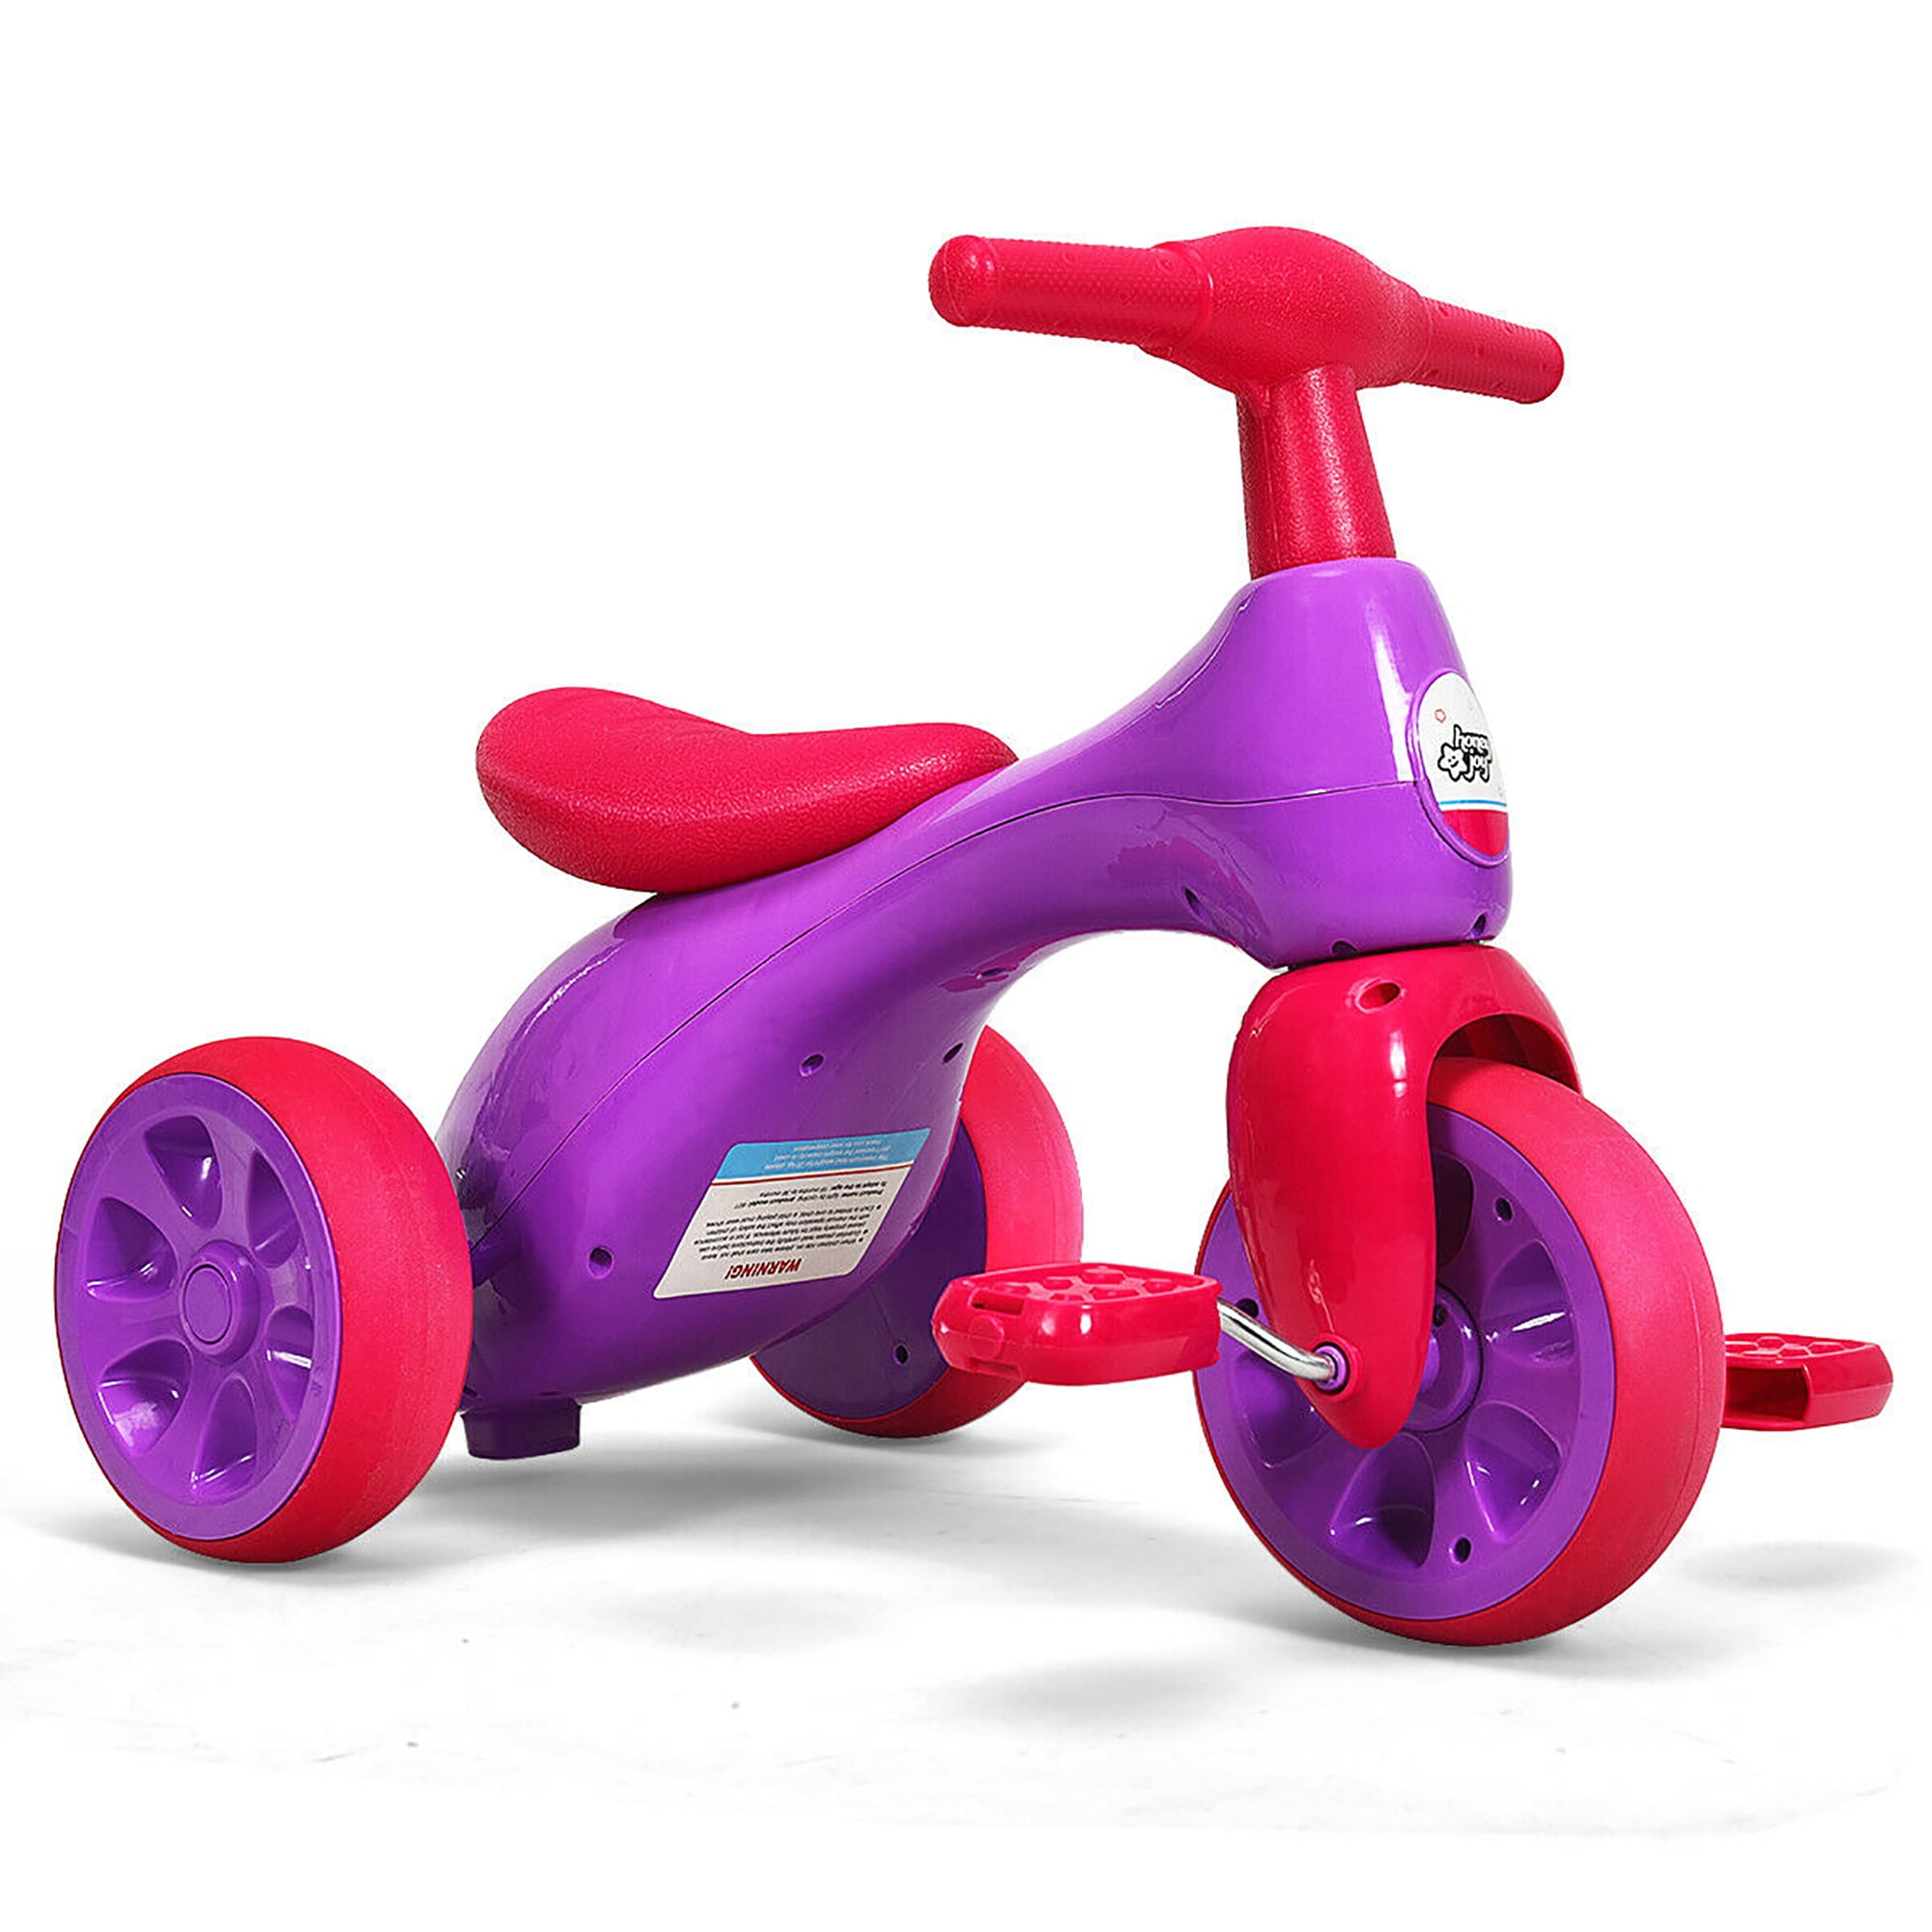 Kids Tricycle Bike Toddler Outdoor Folding Trike Adjustable Seat Red Or Pink New 